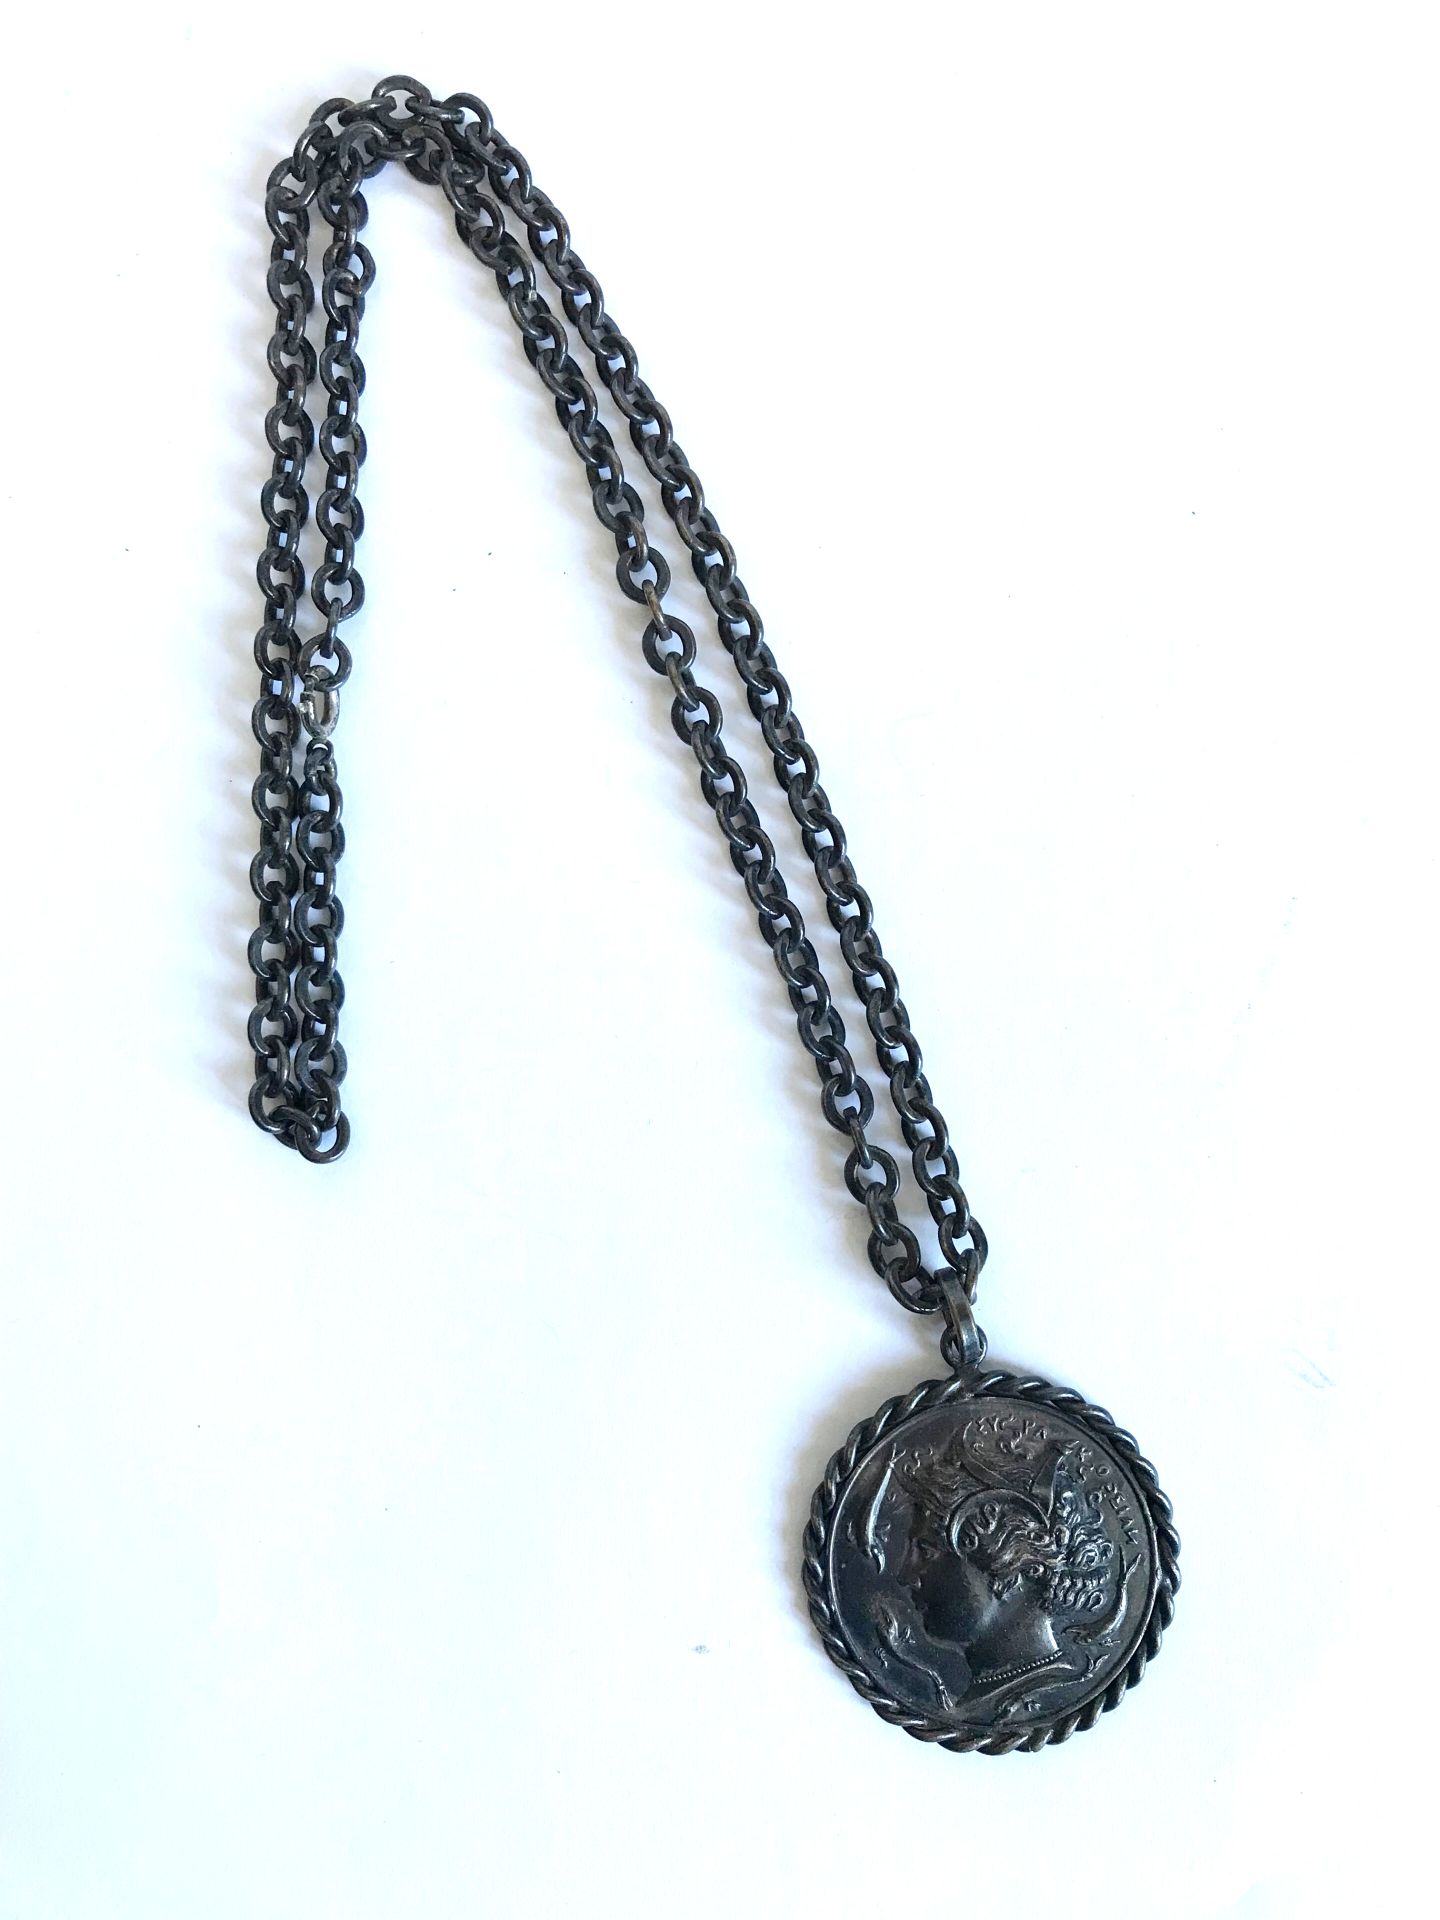 Null Chain and medallion in the Antique style in blackened metal
Souvenir of Gre&hellip;